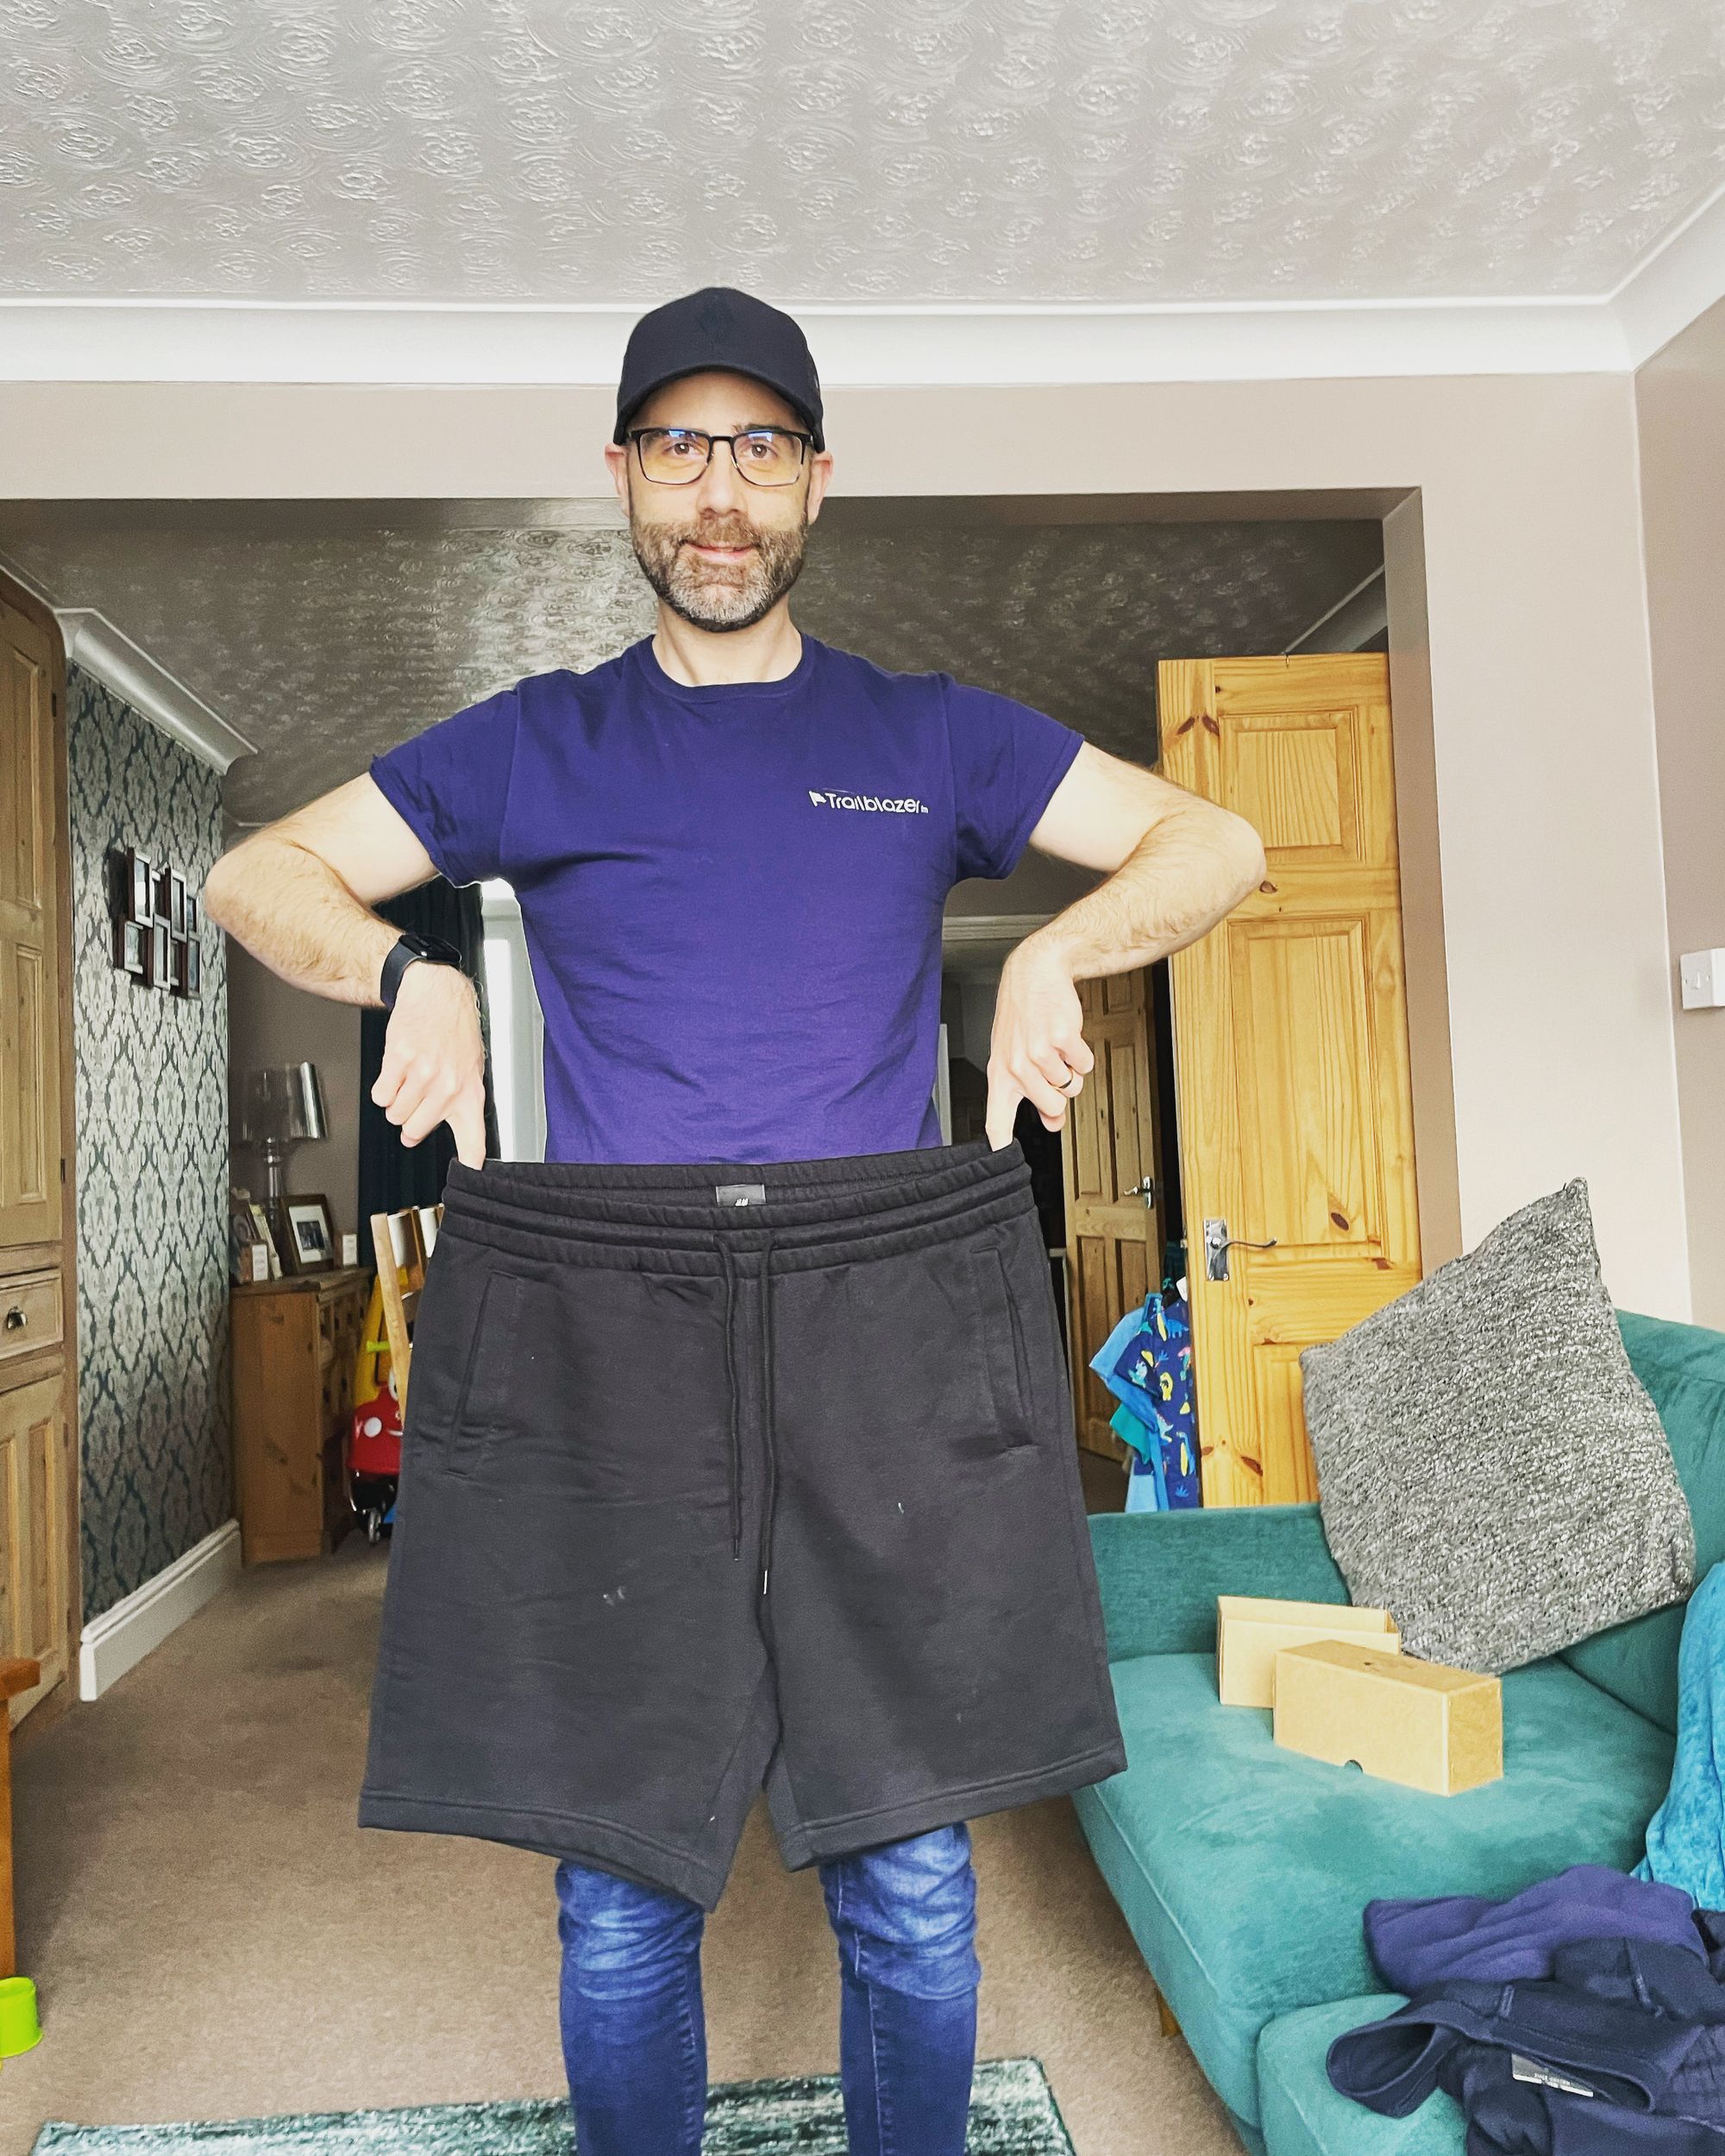 An image of Lee holding up his old shorts which are far too large for him now!